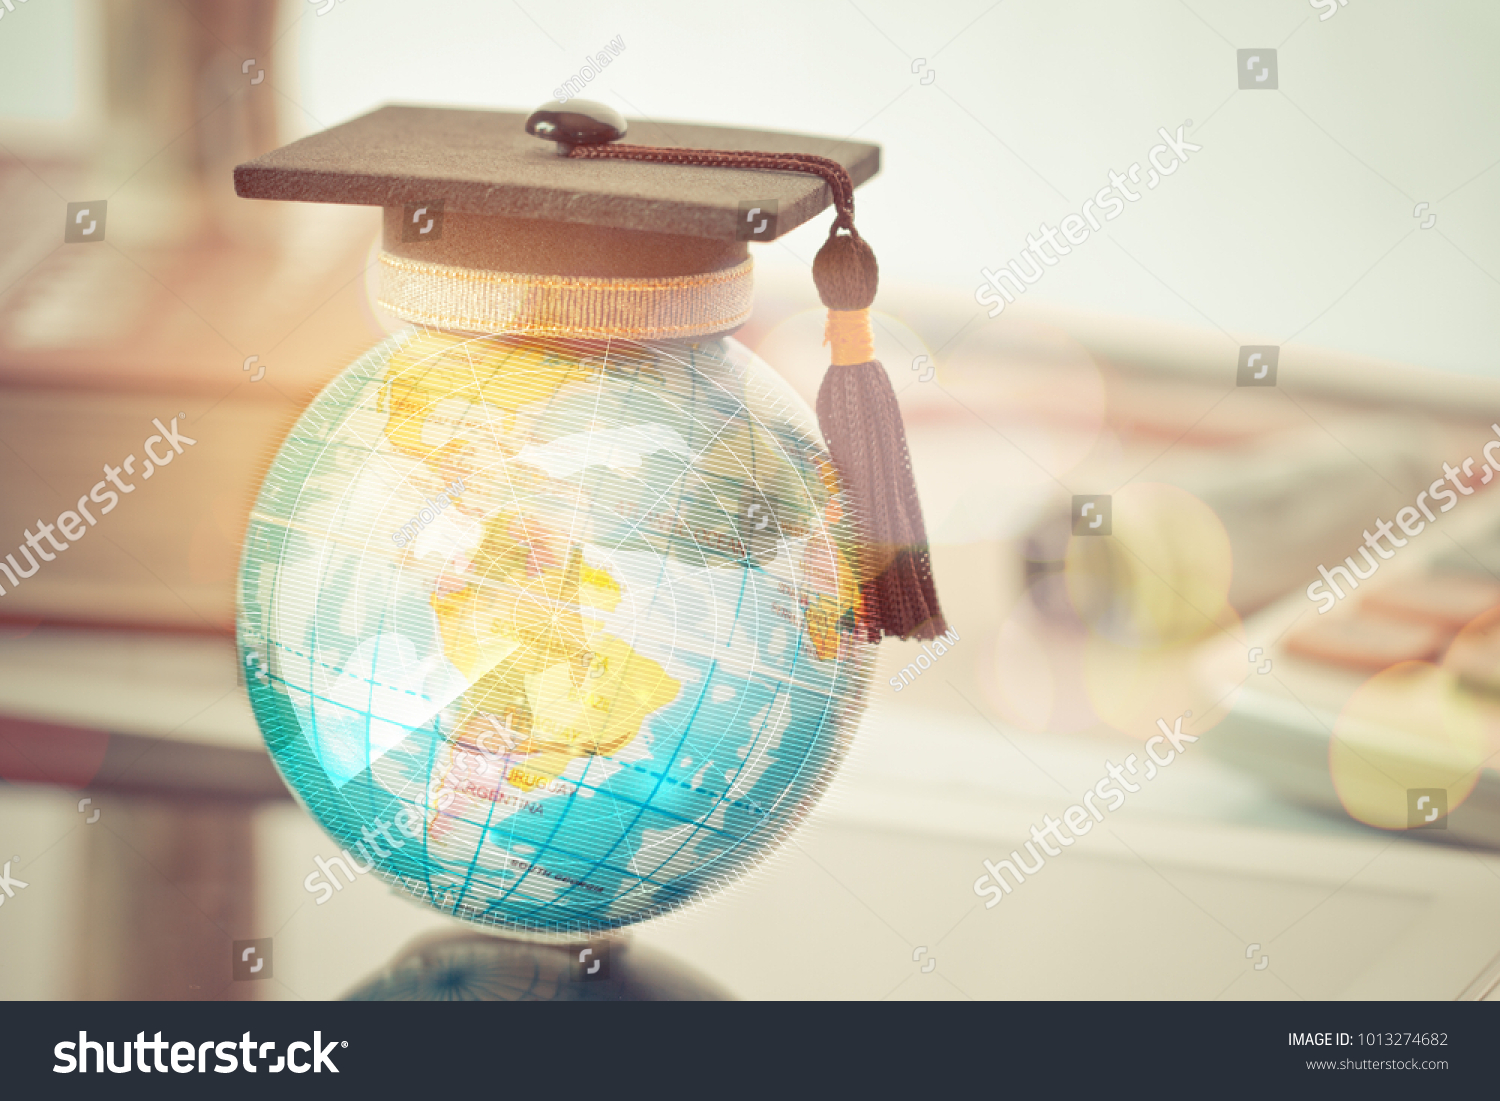 Studies lead to success in the world education motivation wall mural